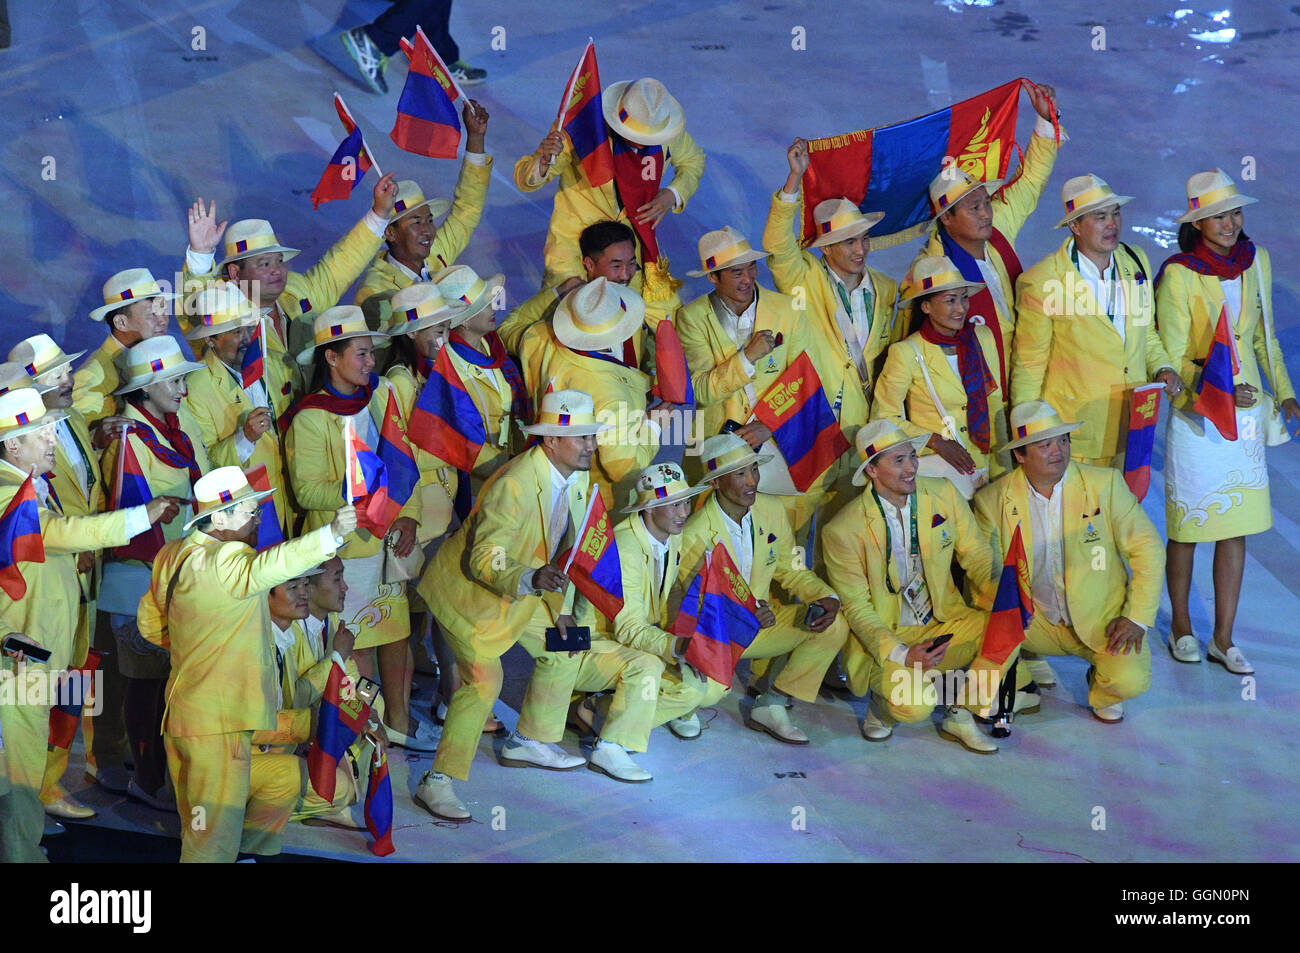 Rio de Janeiro, Brazil. 5th Aug, 2016. Athletes of Mongolia pose for a picture during the opening ceremony of the Rio 2016 Olympic Games at the Maracana stadium in Rio de Janeiro, Brazil, 5 August 2016. Photo: Lukas Schulze/dpa/Alamy Live News Stock Photo